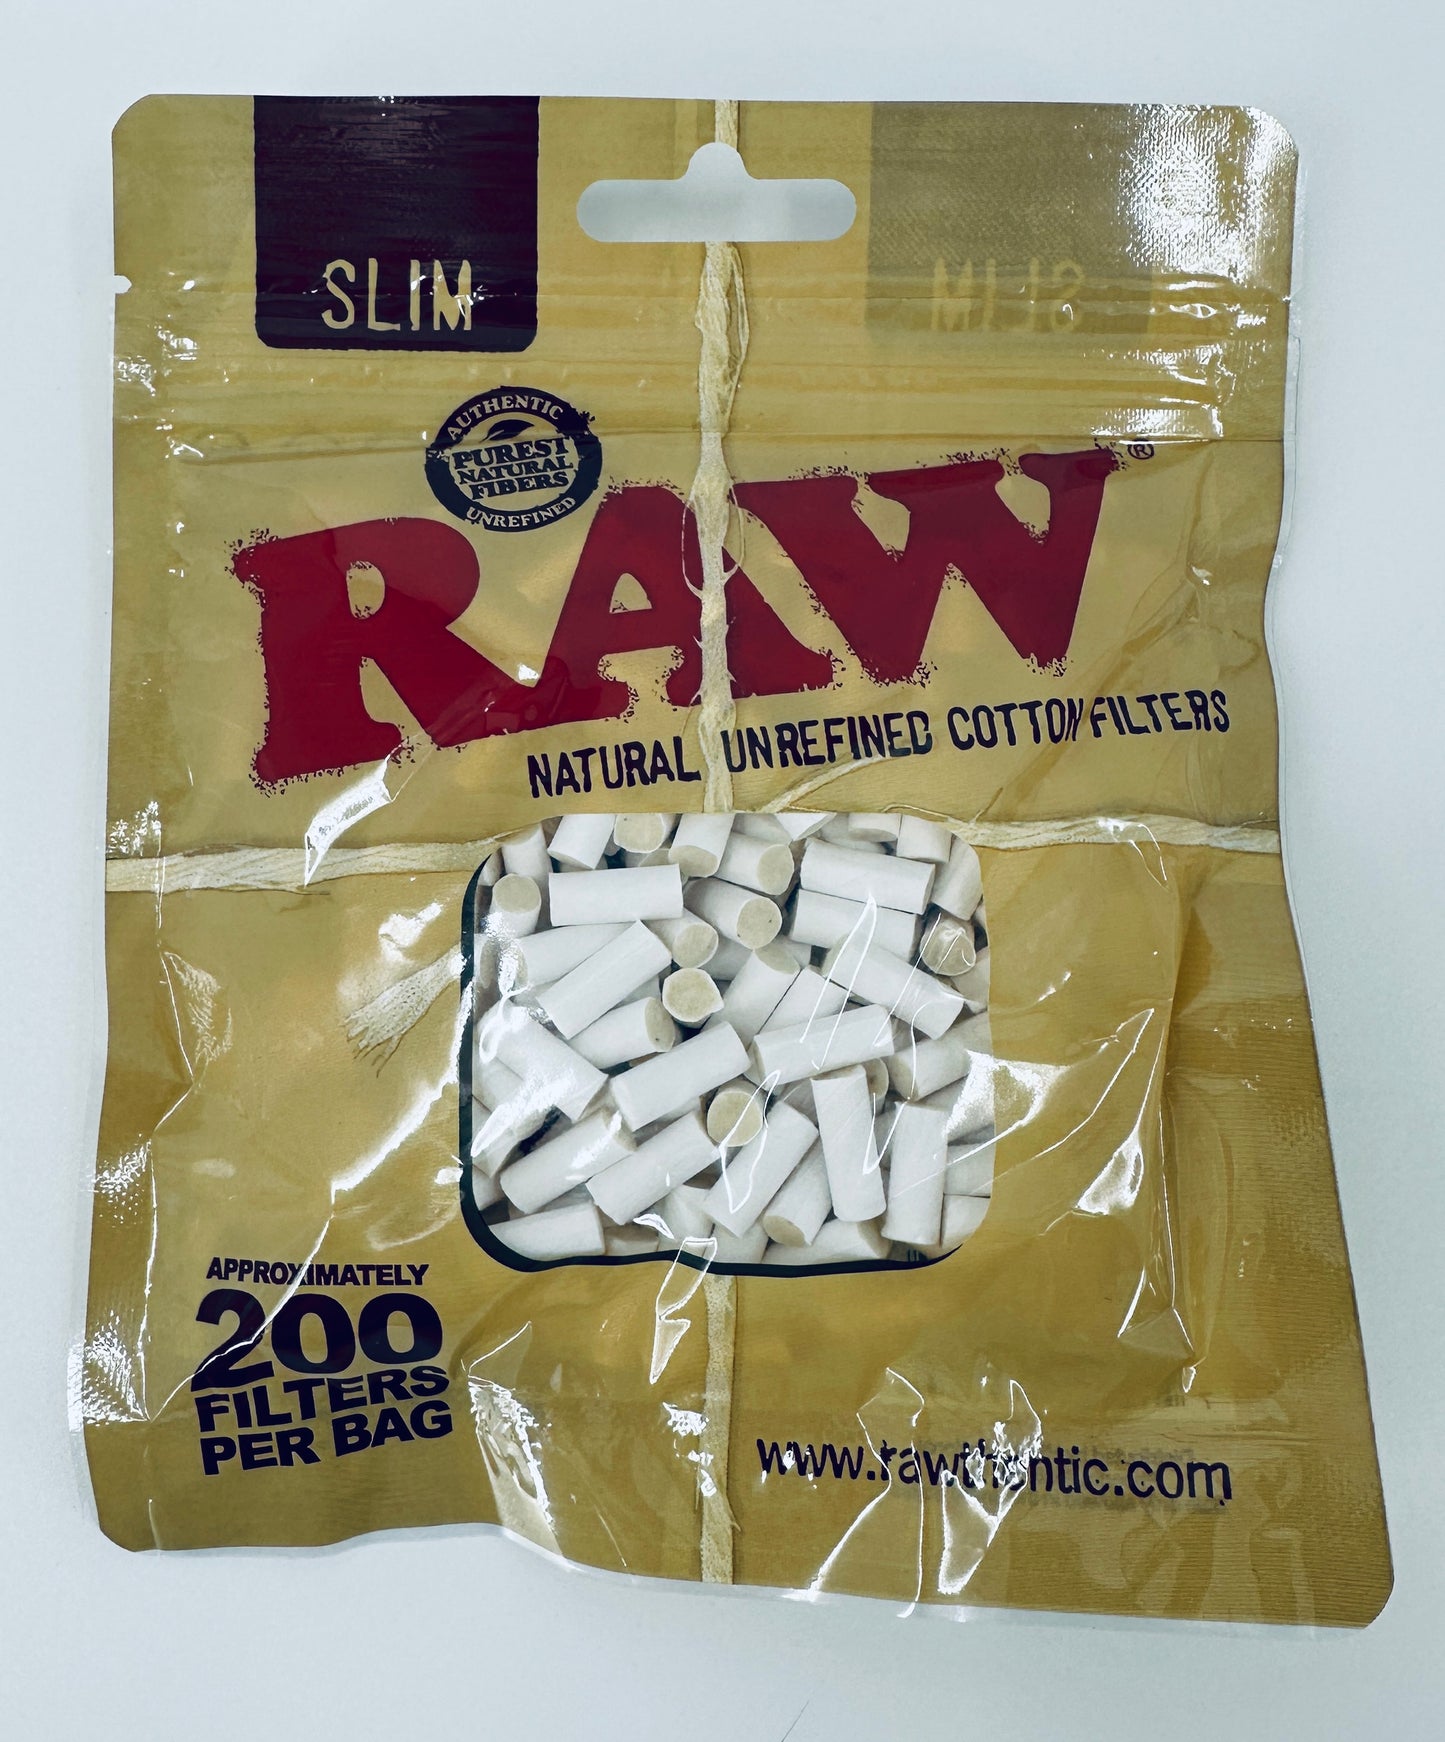 RAWthentic Natural Unrefined Cotton Filter Tips - Slim - 200ct bag